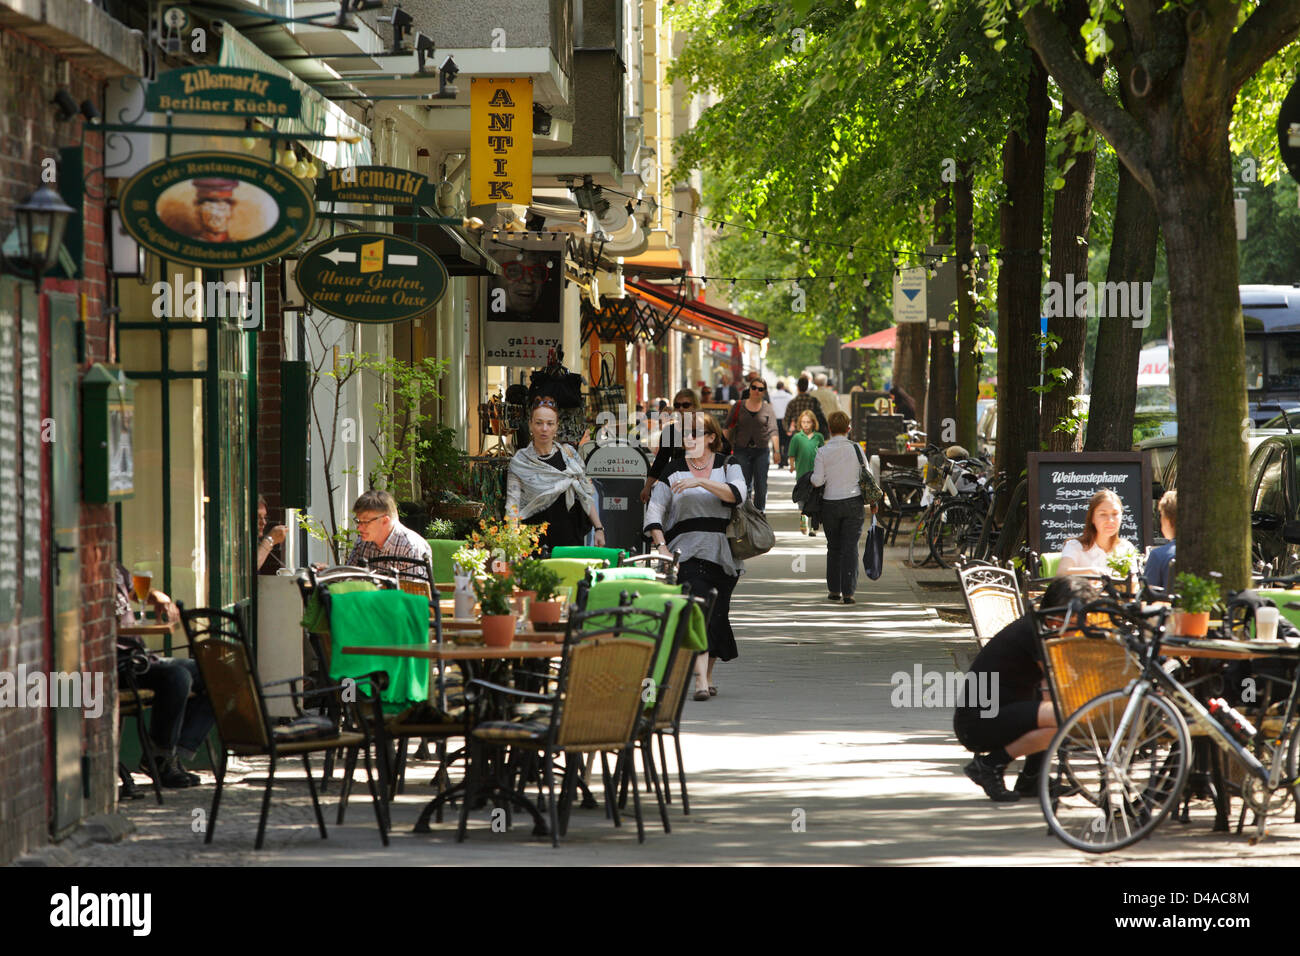 Berlin Cafes High Resolution Stock Photography and Images - Alamy